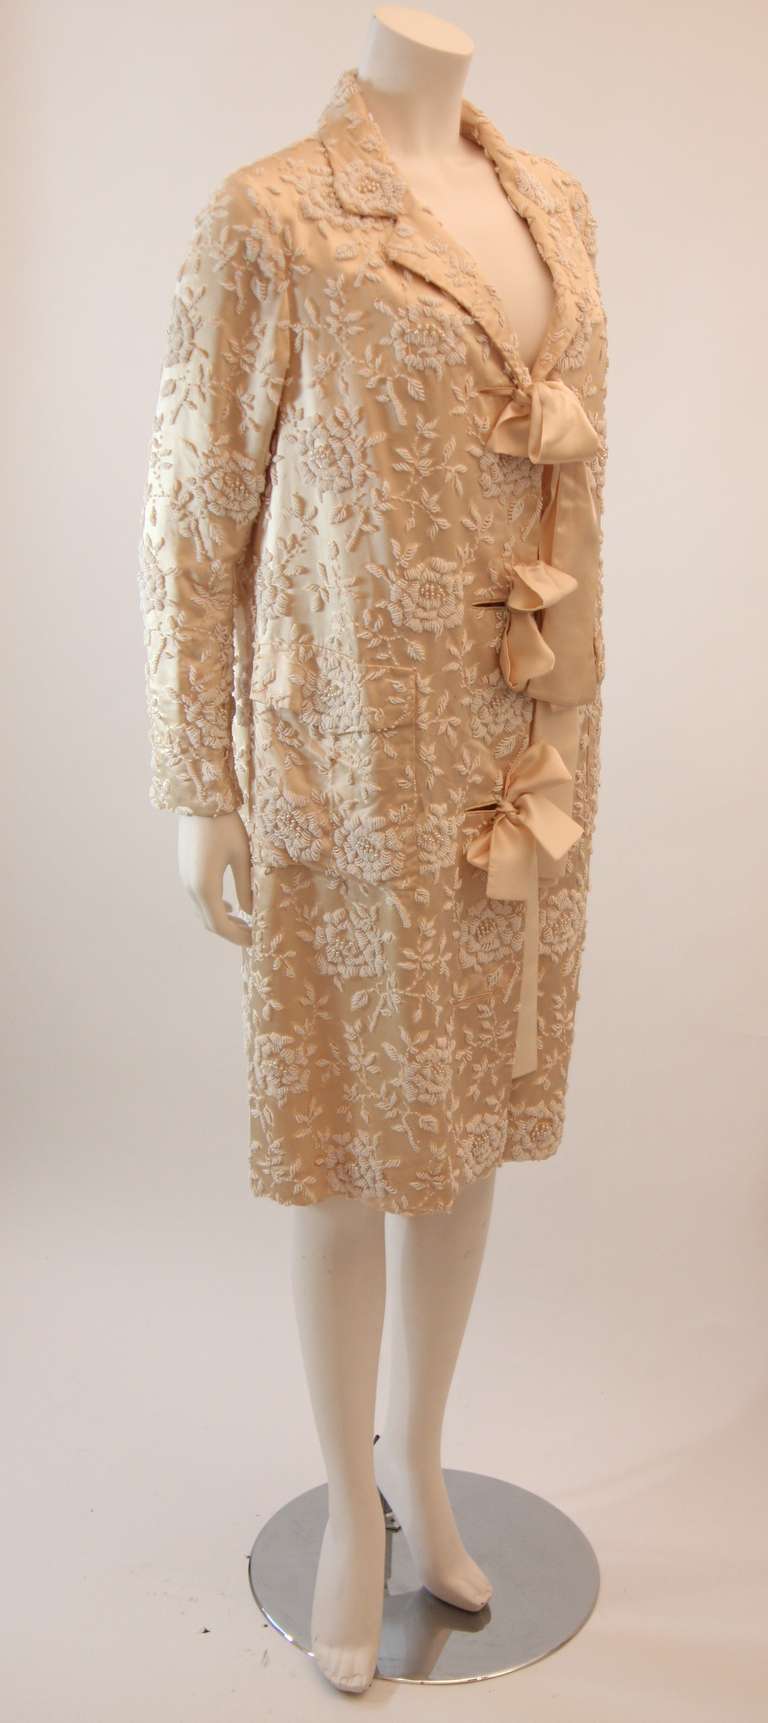 Beige Cream Silk Coat with white floral beaded motif and ribbon tie closures